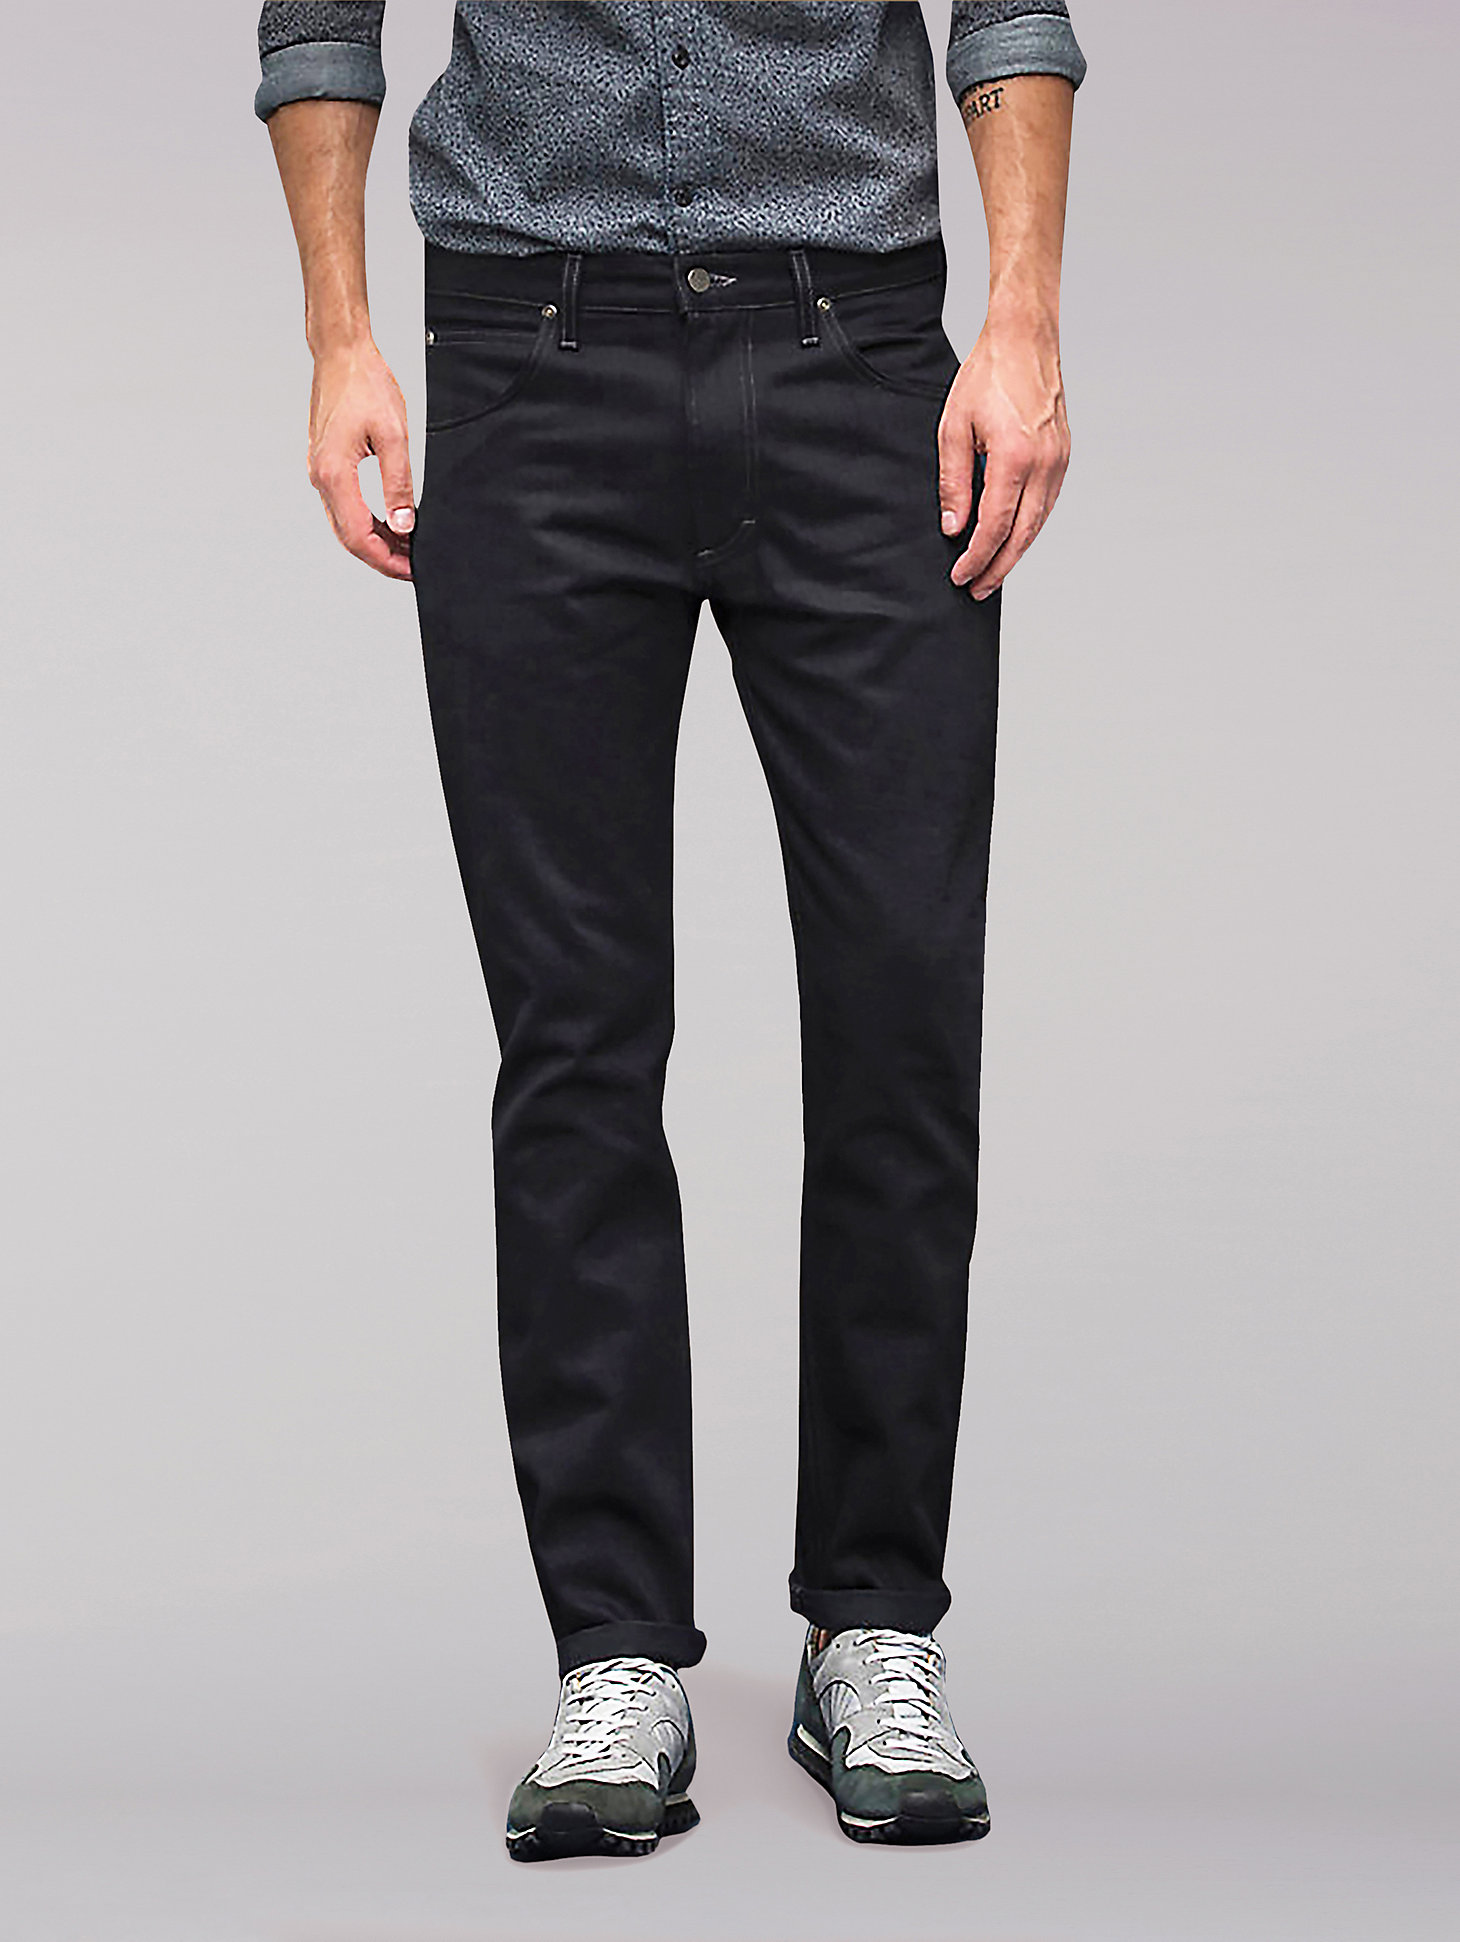 Lee Rider Jeans Homme